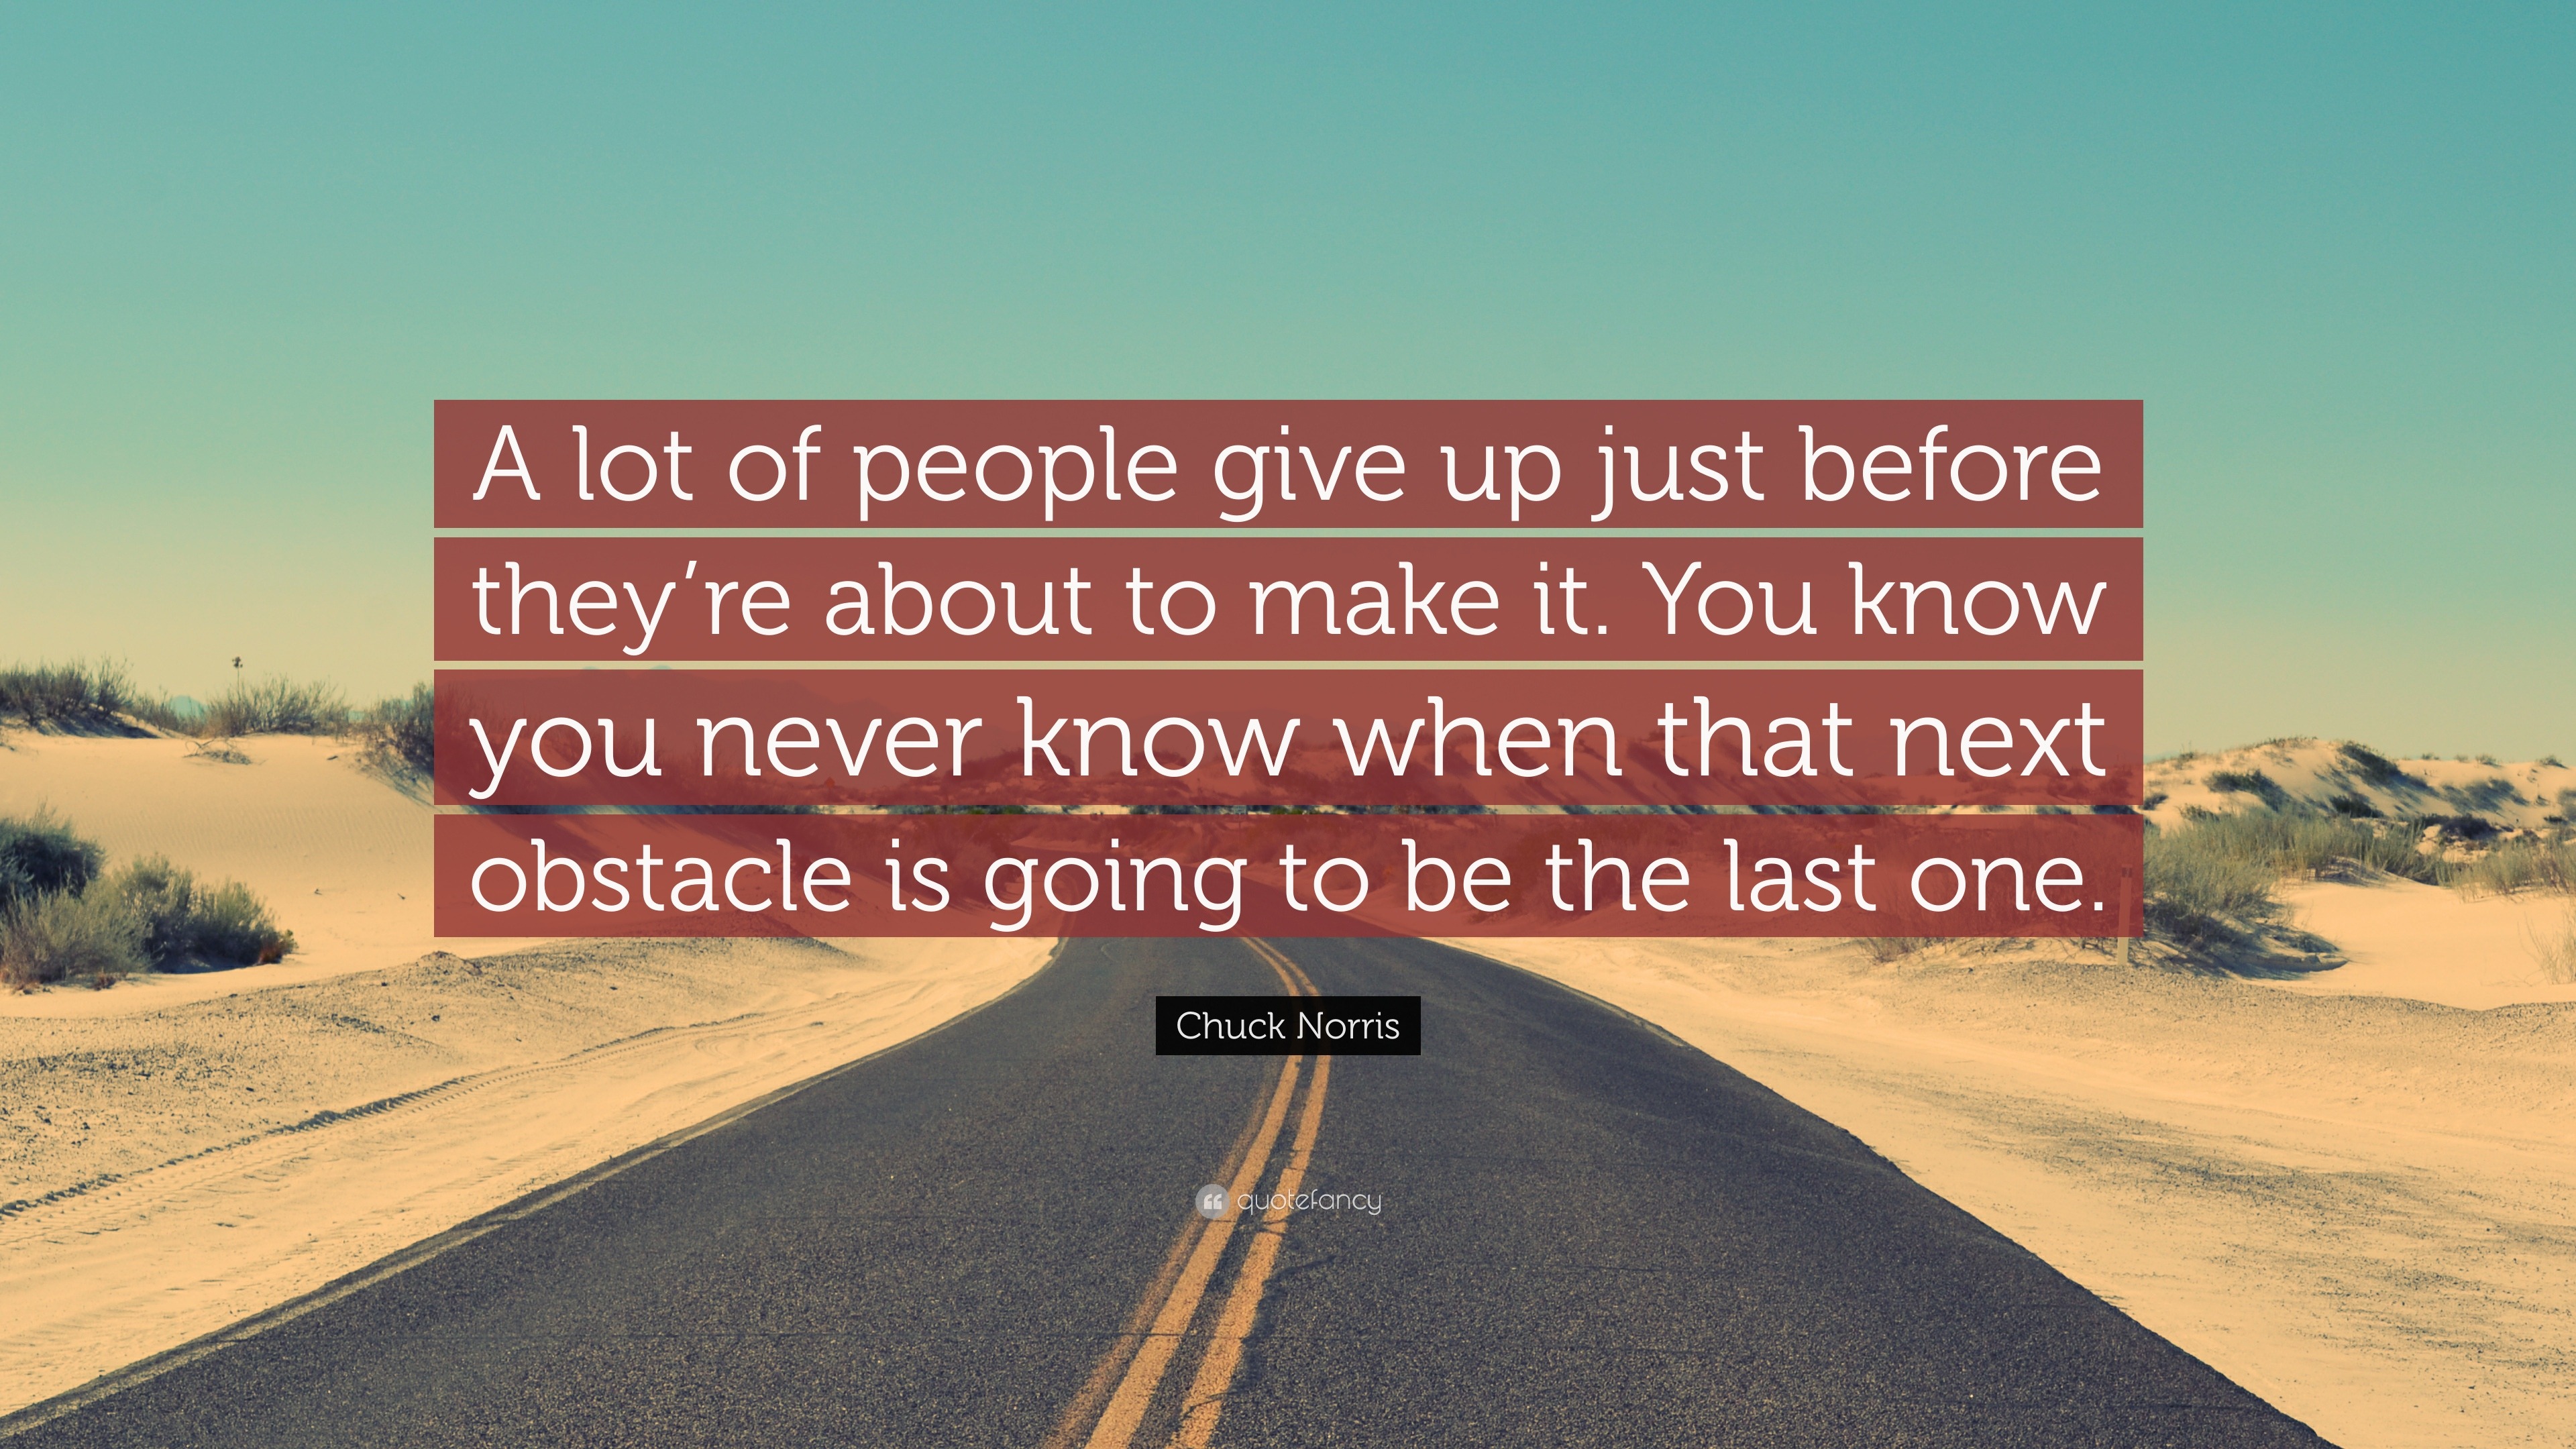 Chuck Norris Quote: “A lot of people give up just before they’re about ...